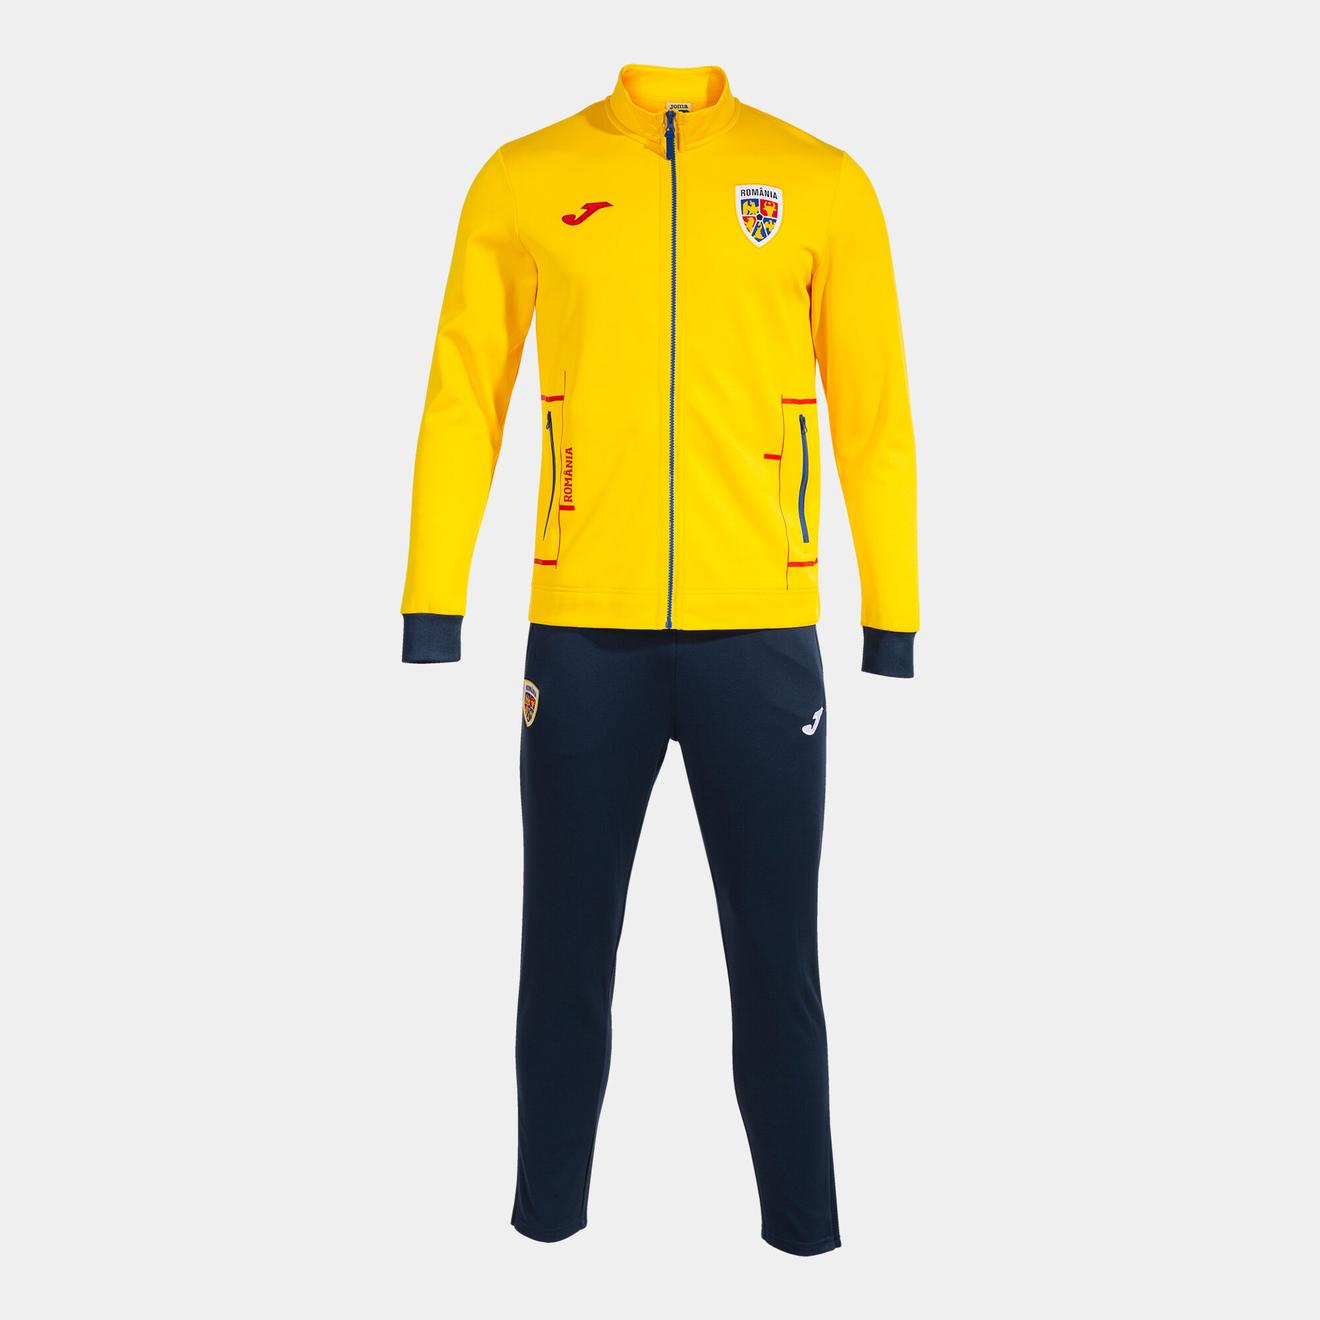 Tracksuit replica Romanian Football Federation offers at £59 in Joma